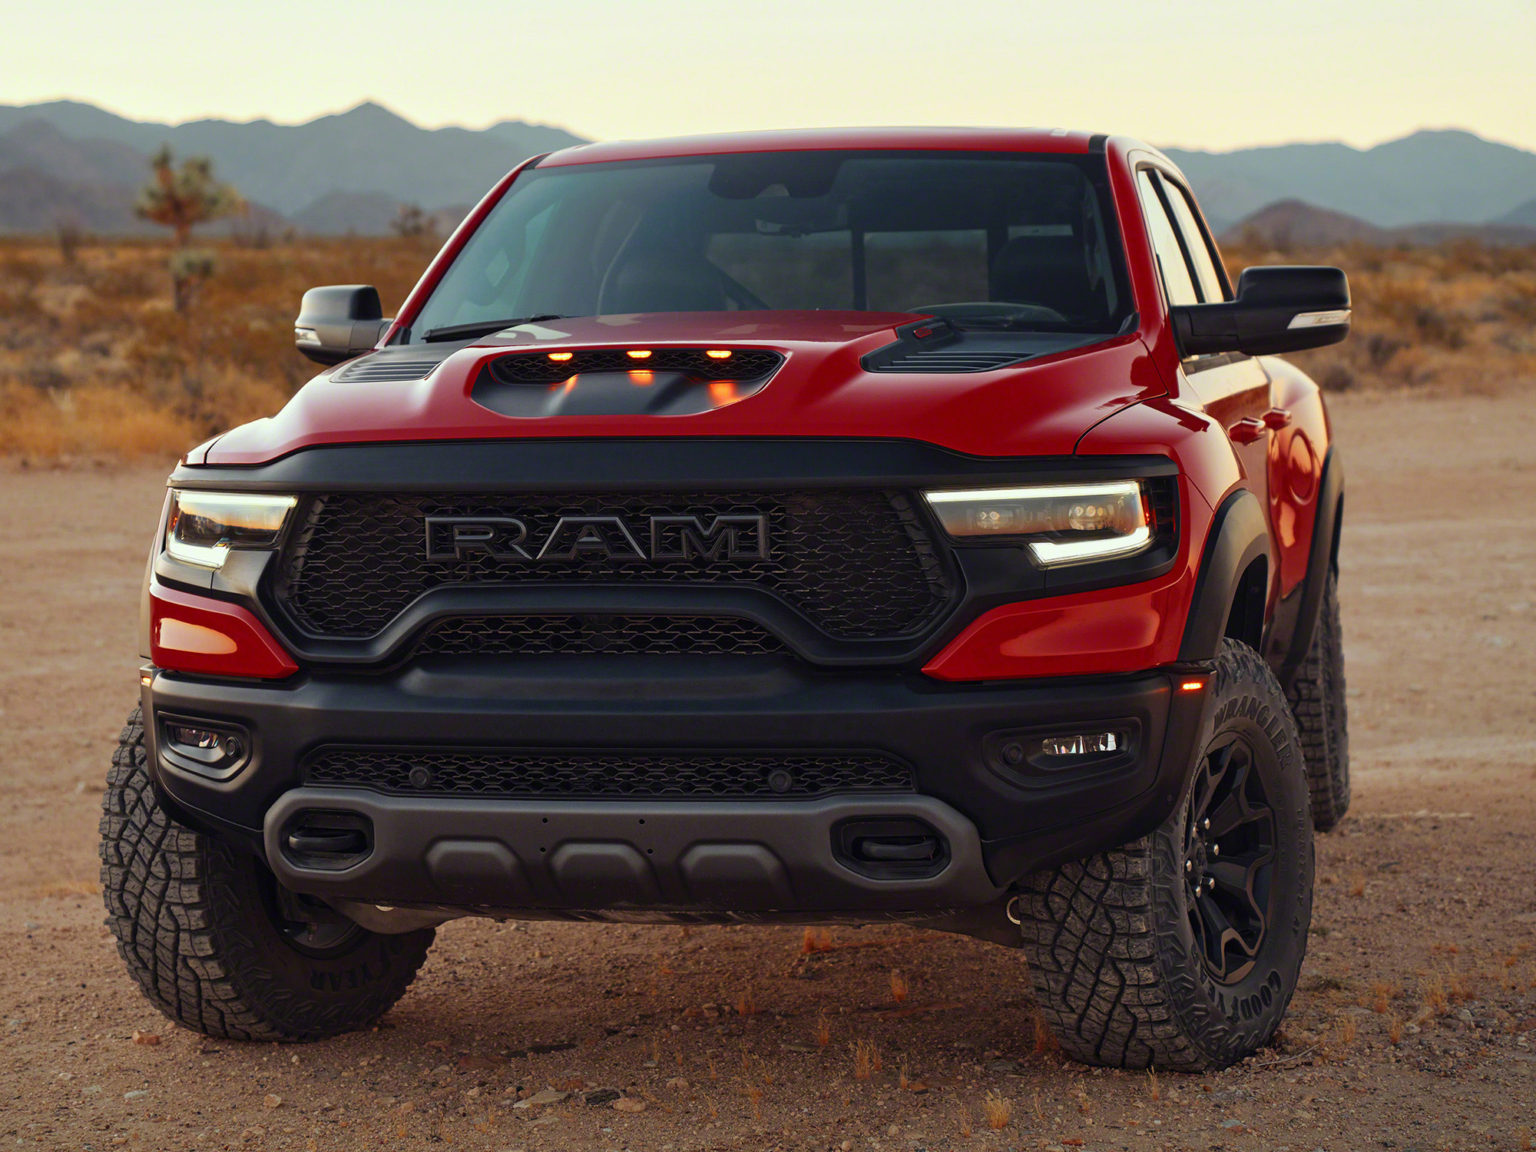 It's true. The 2021 Ram 1500 TRX is the quickest, fastest, most powerful mass-produced pickup ever made.